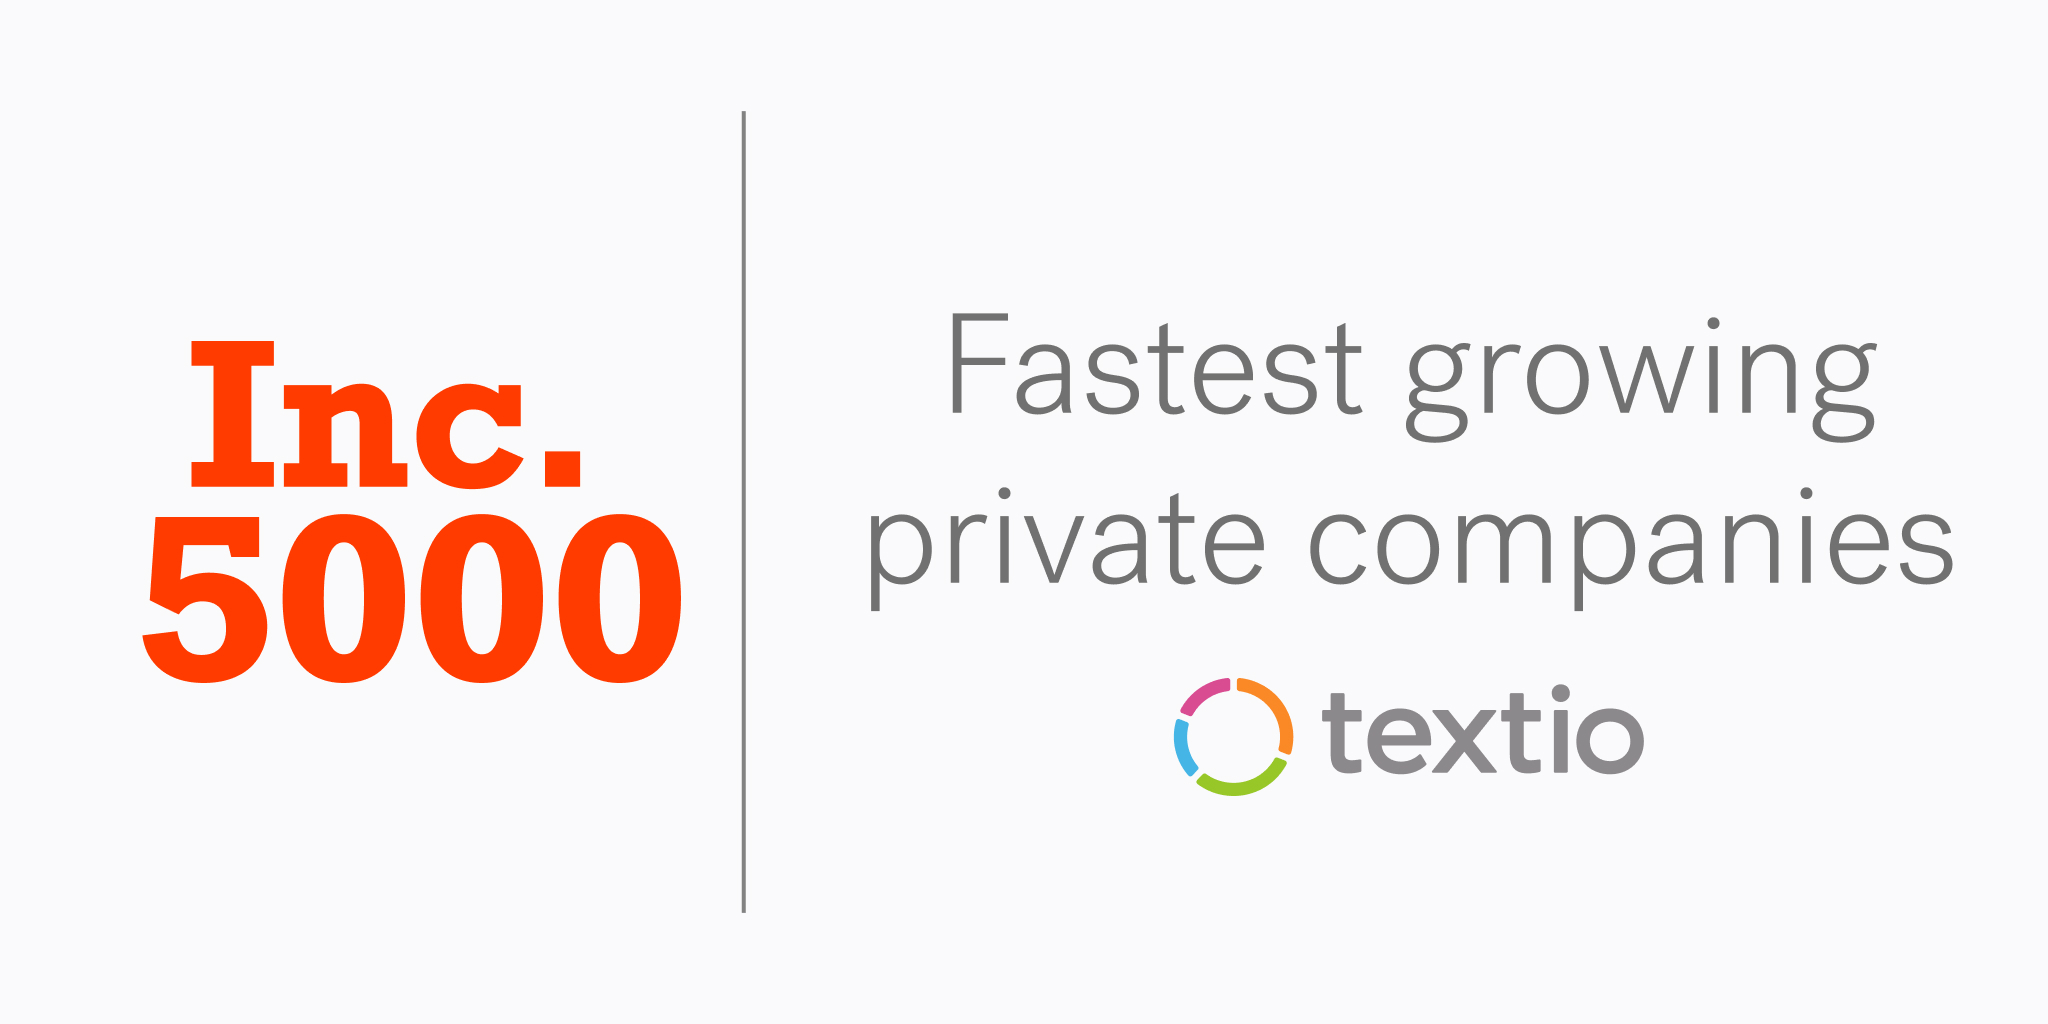 Inc. 5000 written in orange next to text "Fastest growing private companies" above the Textio logo